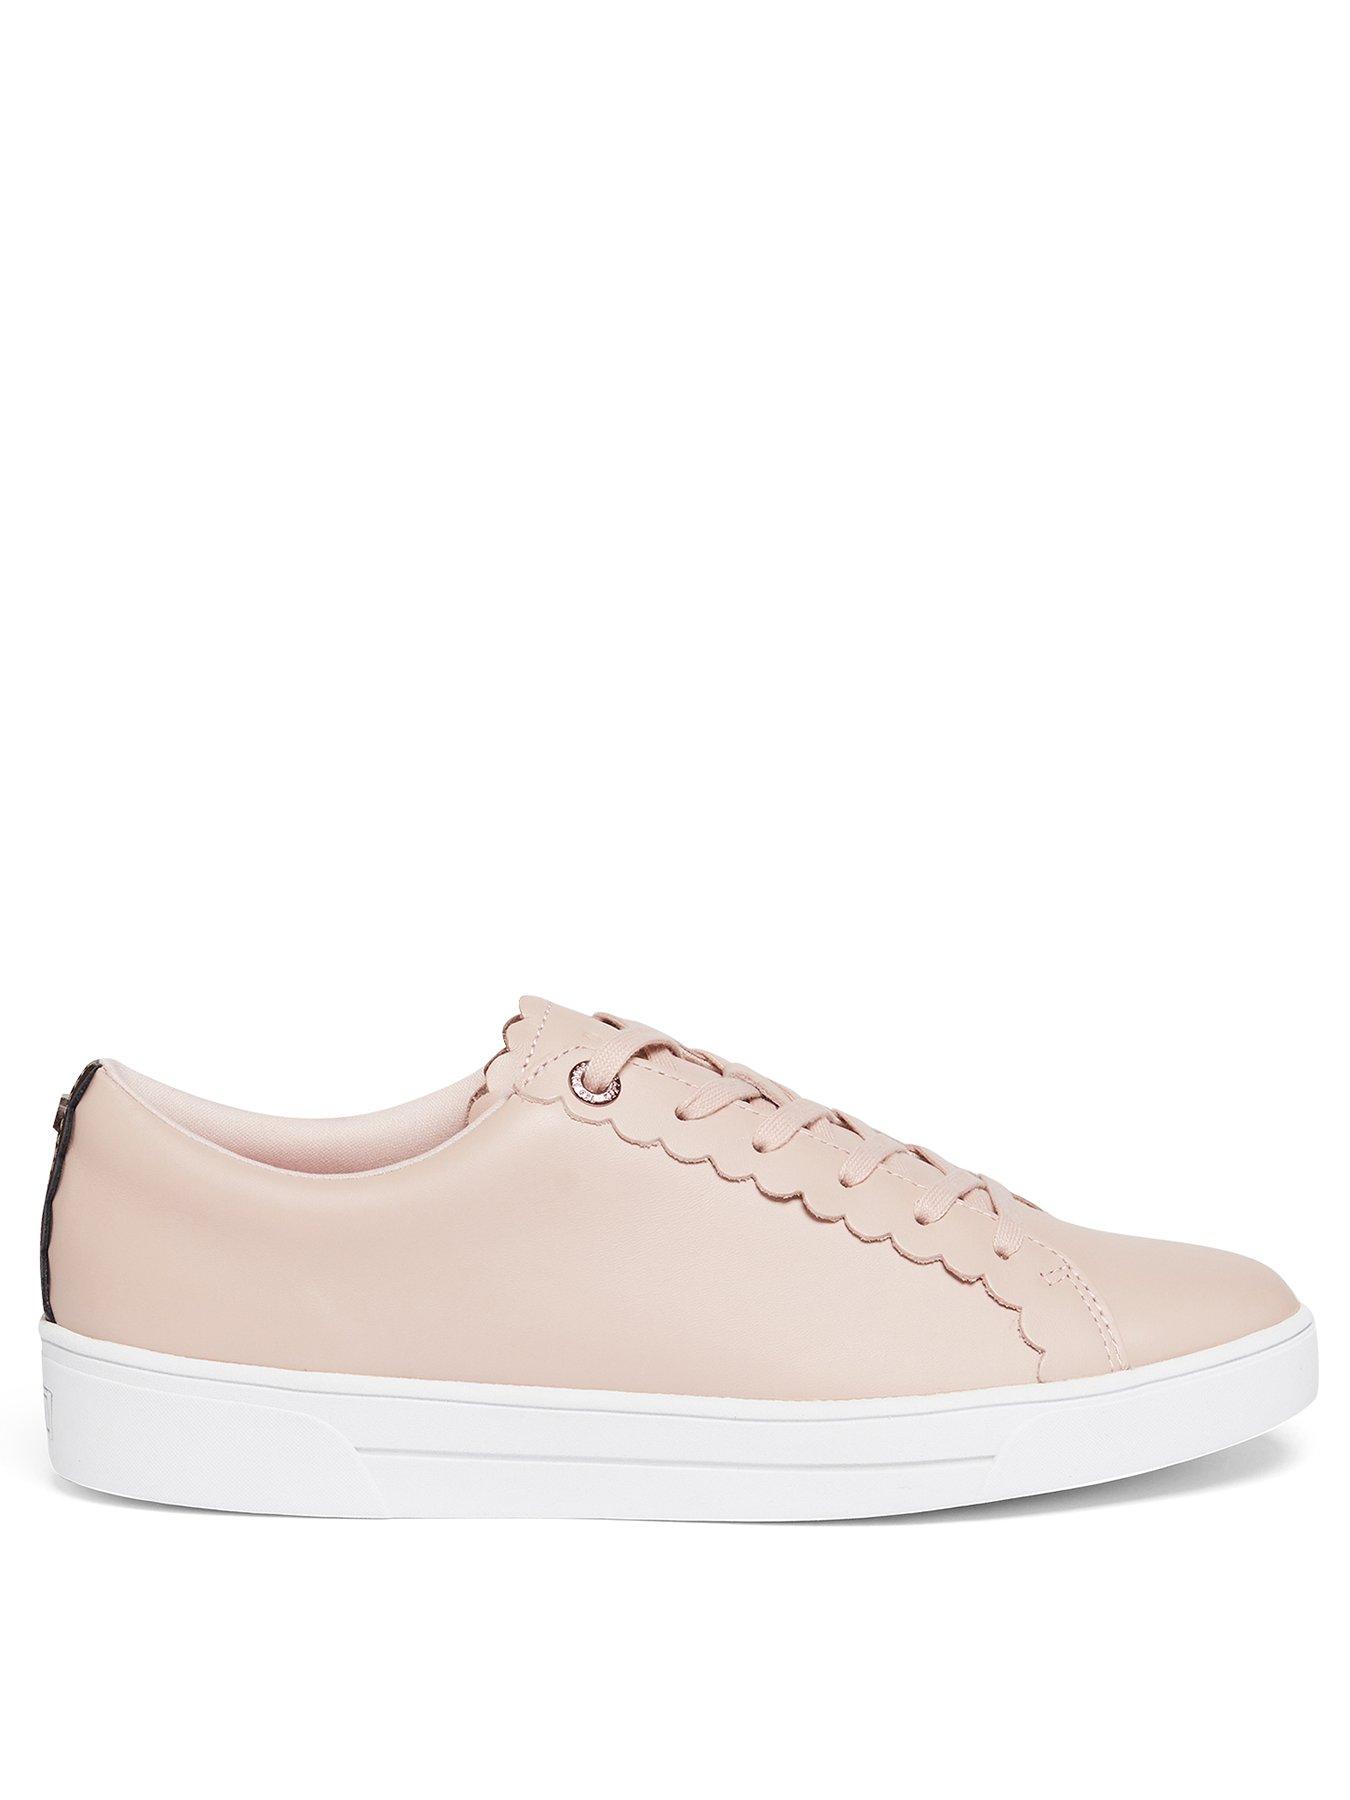 girls ted baker trainers